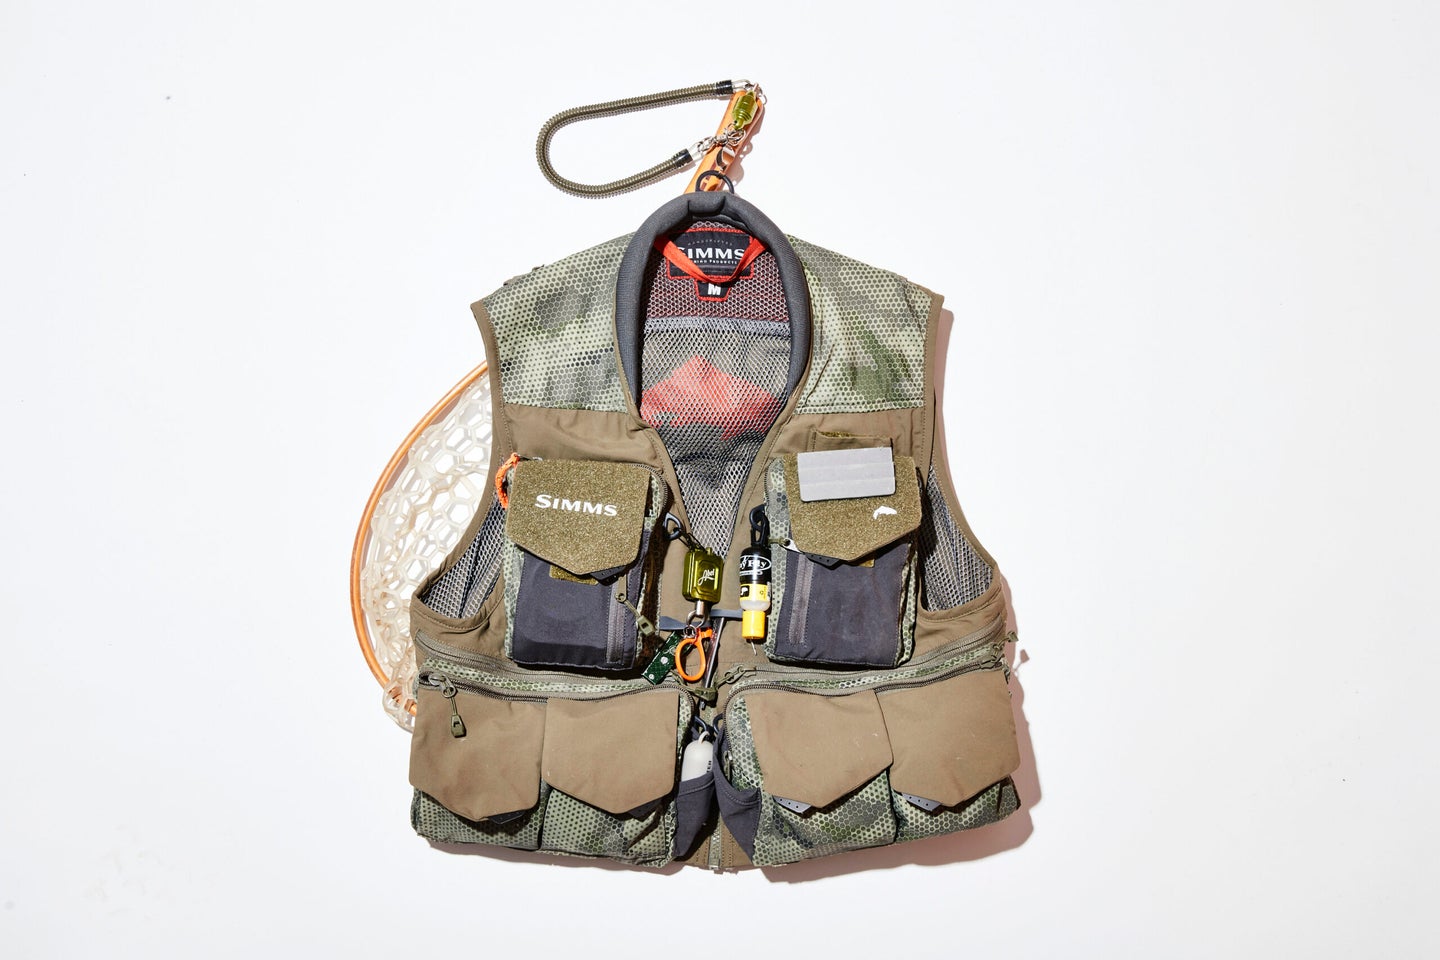 The author's fly-fishing vest comes in at just under 11 pounds.